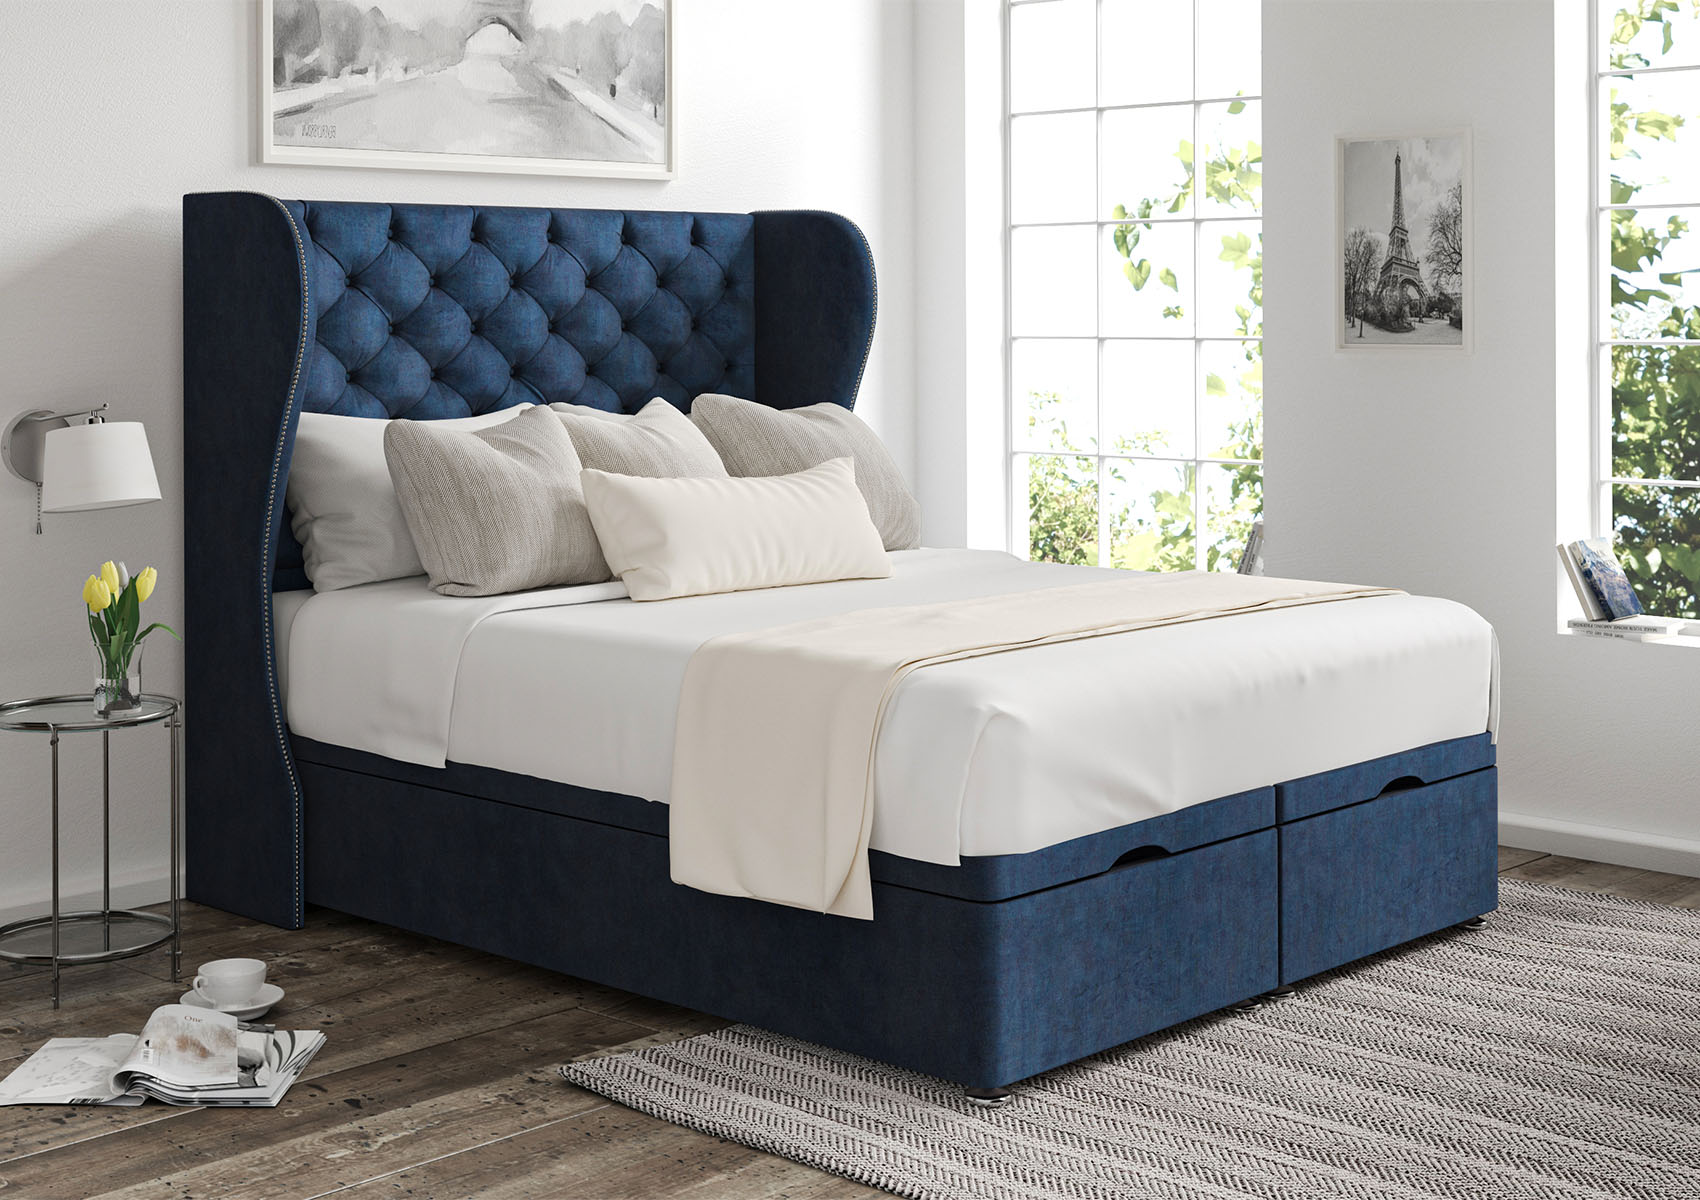 View Miami Arlington Ice Upholstered King Size Ottoman Bed Time4Sleep information